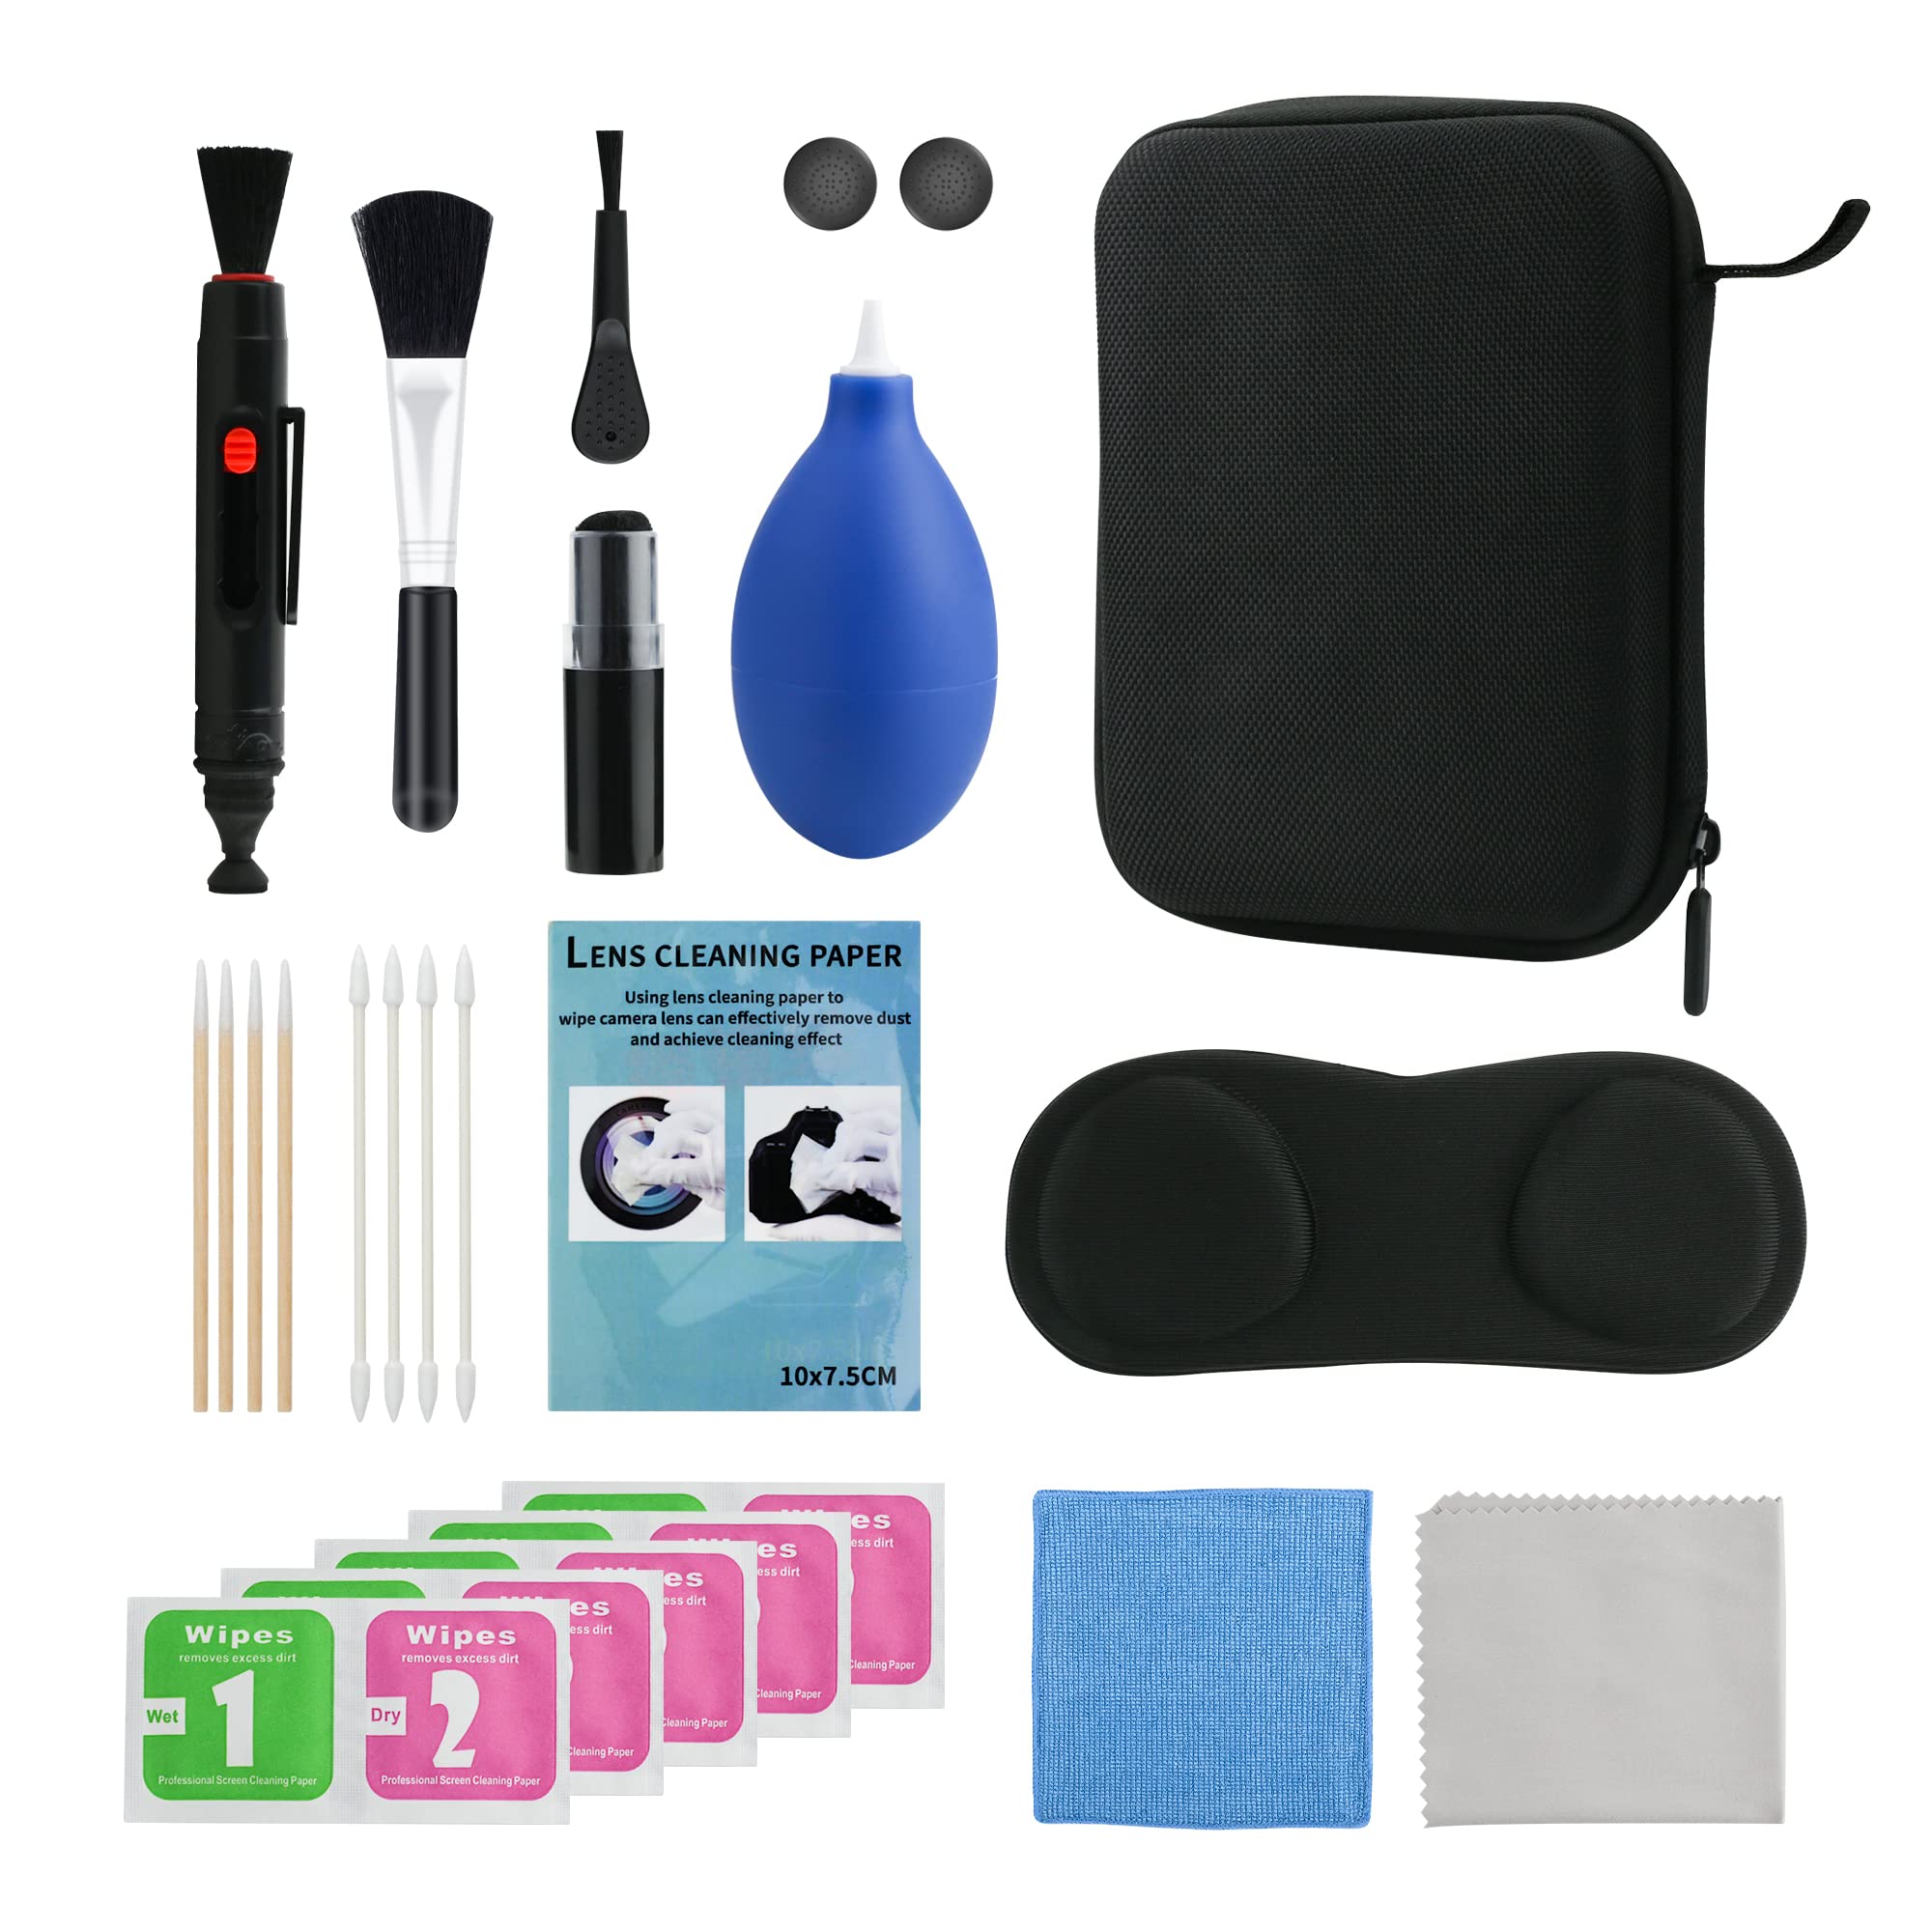 Cleaning supplies and phone accessories